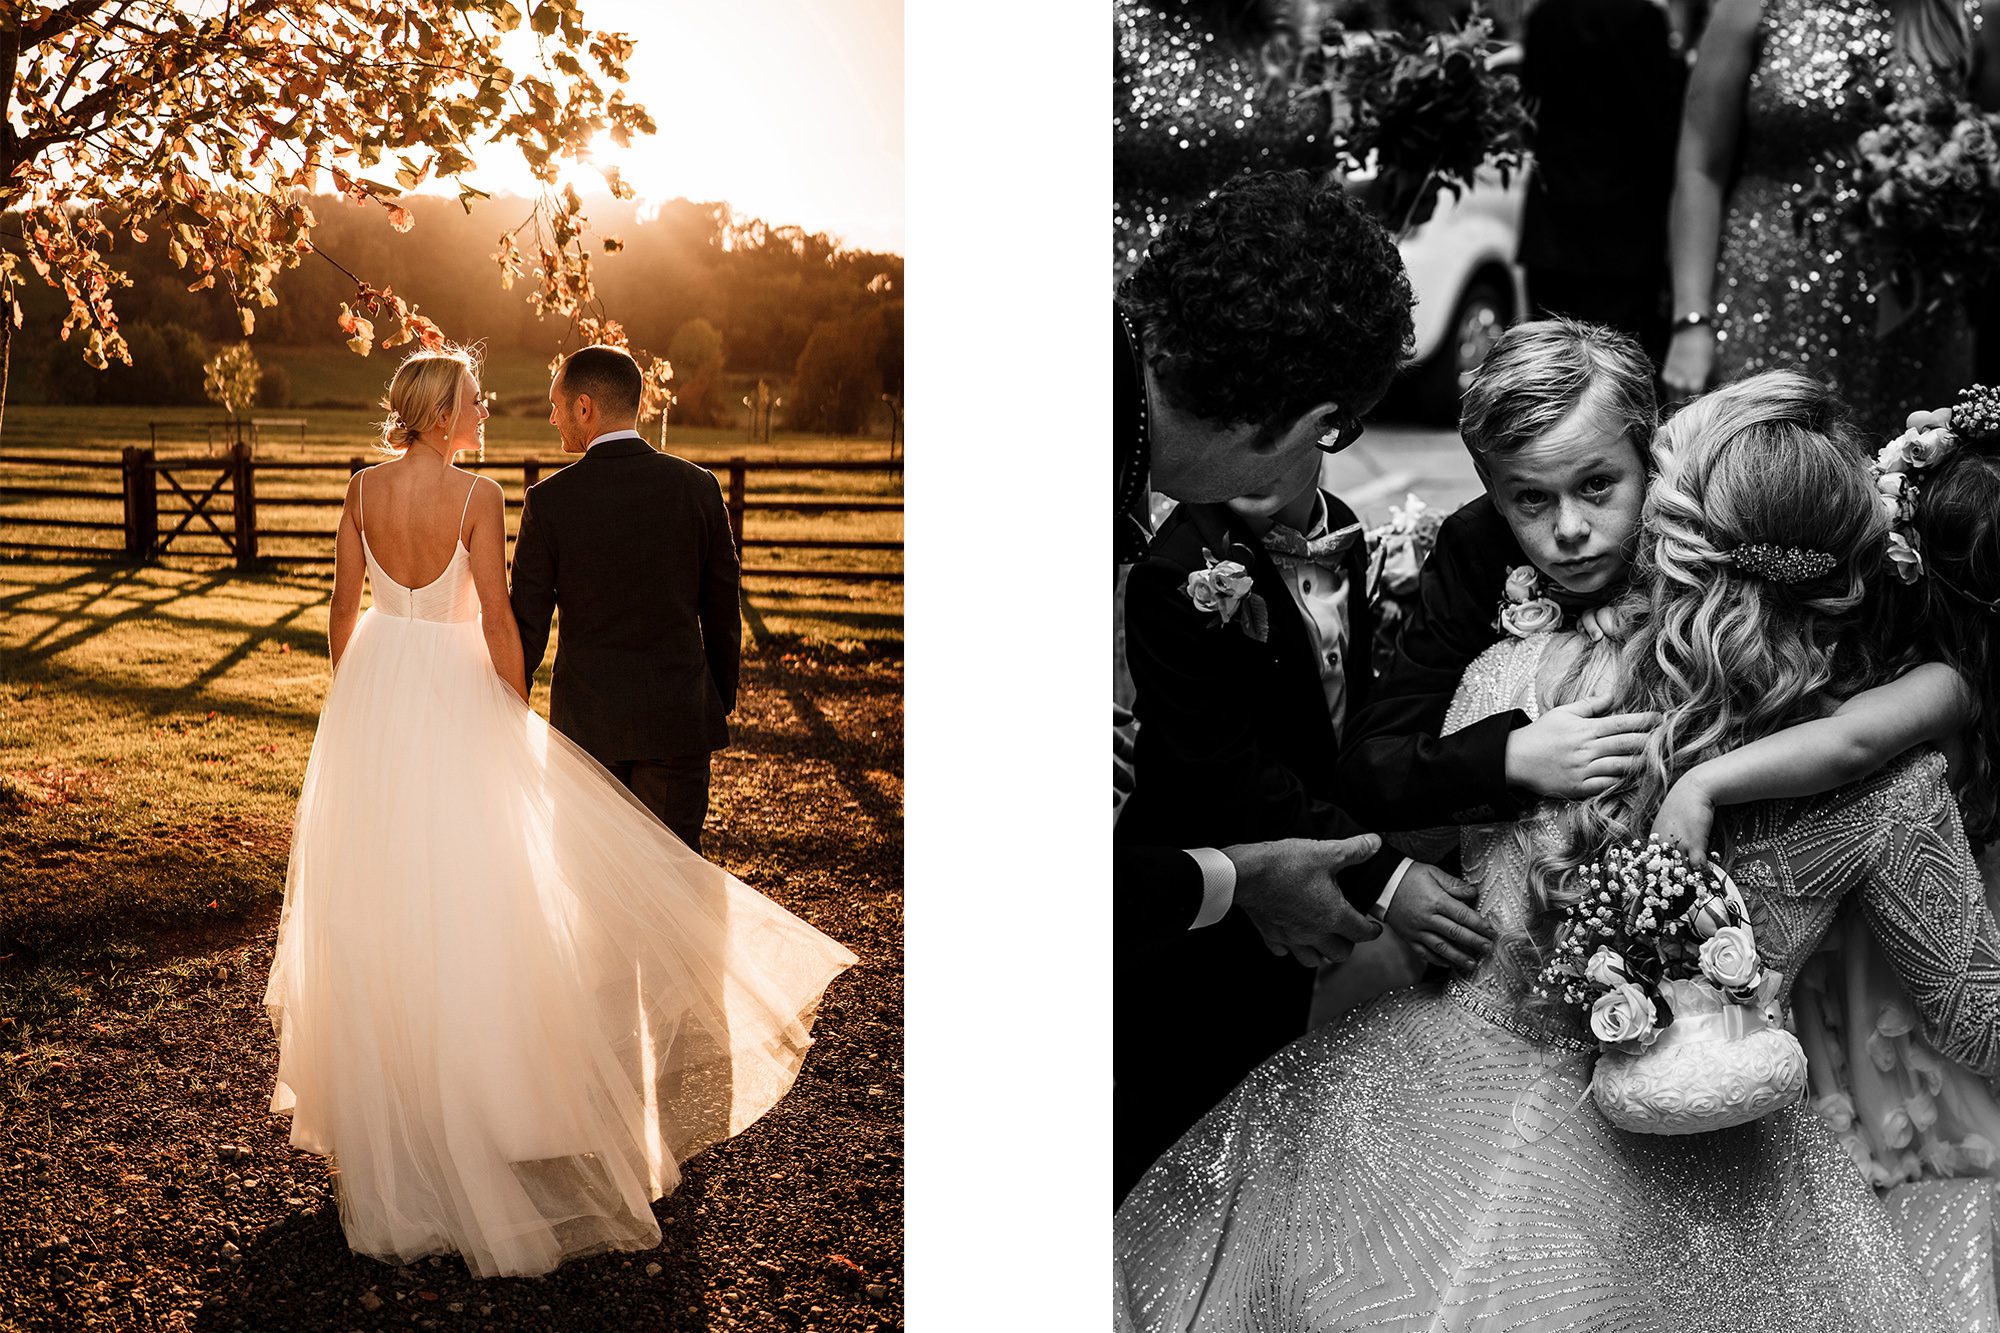 Two wedding images by Stephen Walker Photography. A couple stand beneath a tree looking towards the sun at golden hour. A bride cuddles children at the wedding.